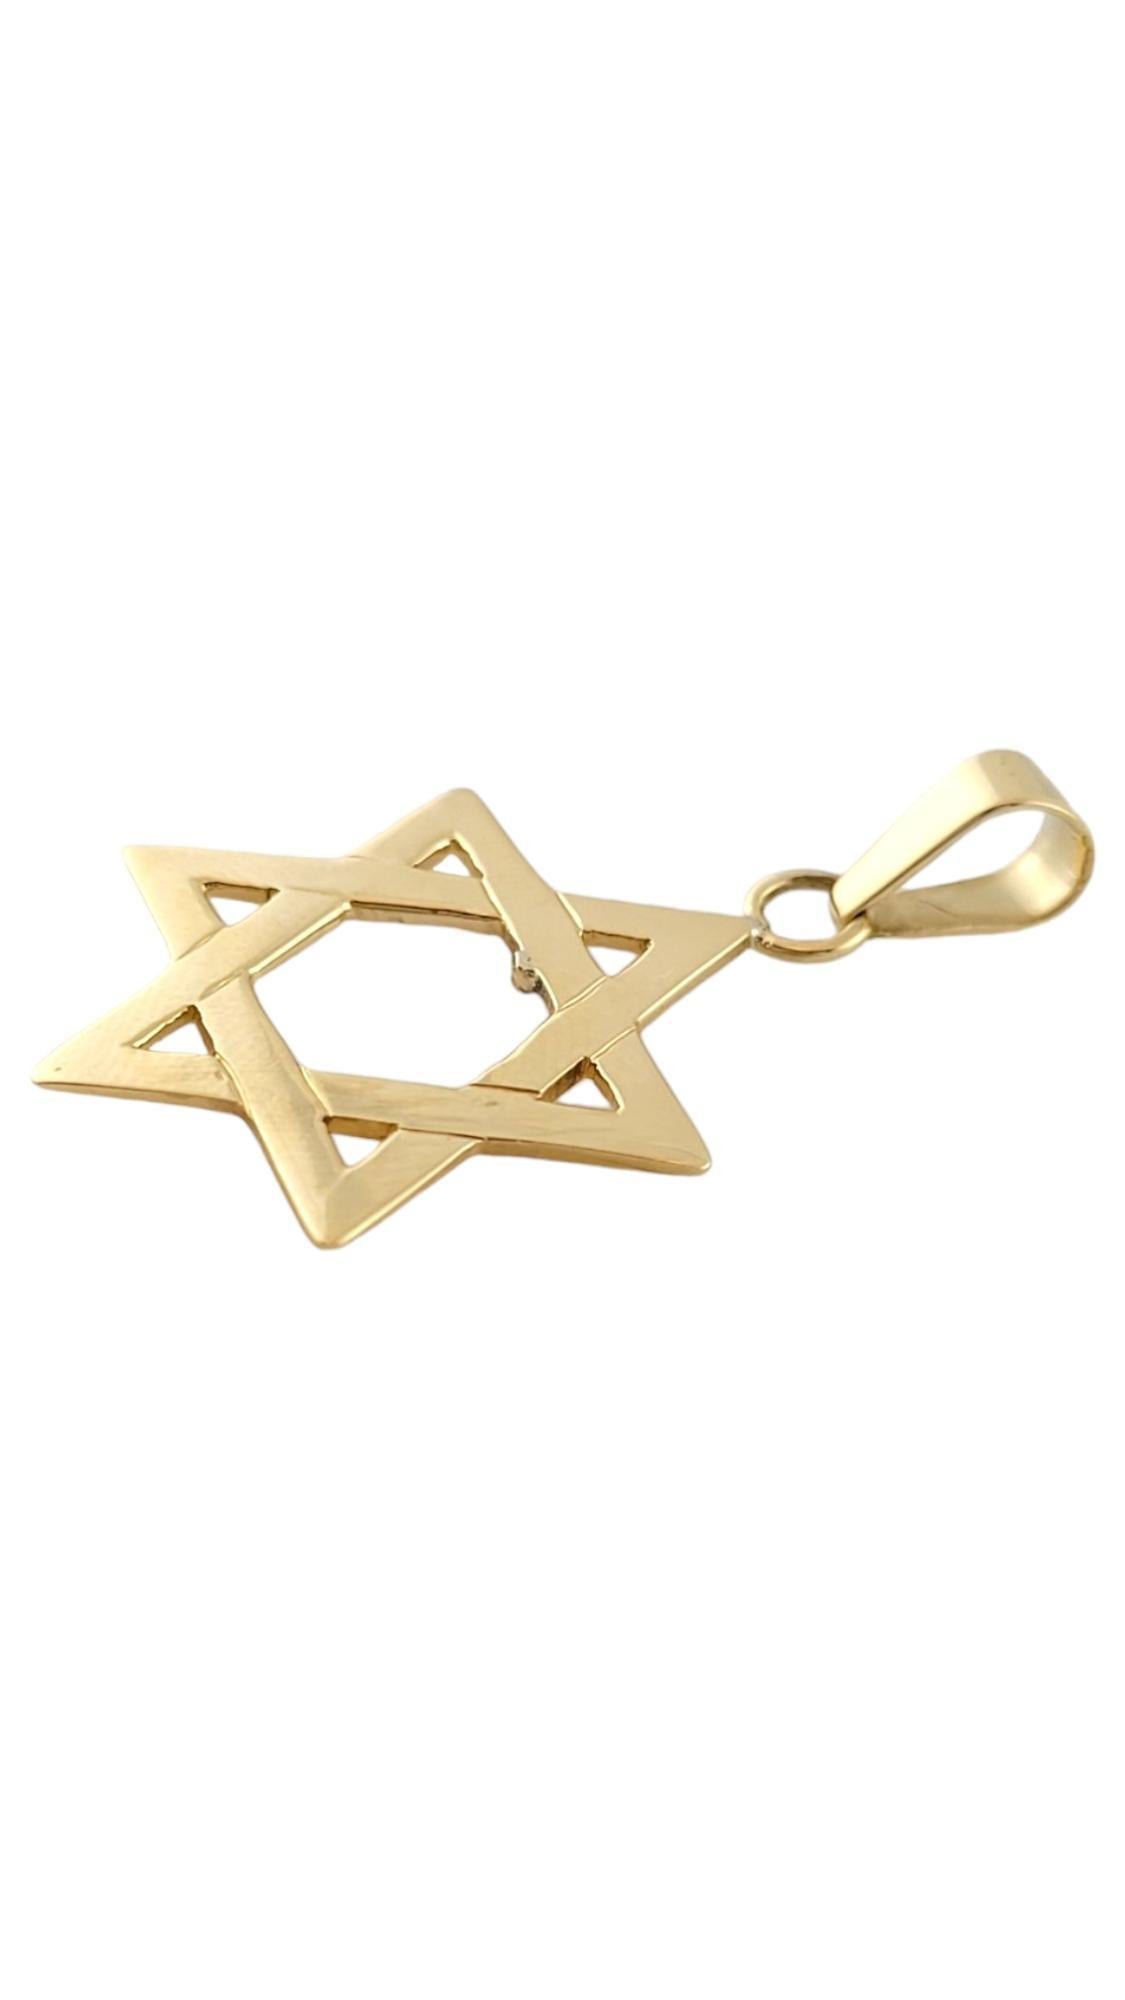 Vintage 18K Yellow Gold Star of David Pendant

This gorgeous star of David pendant is crafted from 18K yellow gold and has a beautiful smooth finish!

Size: 28.51mm X 21.3mm X 0.86mm
Length w/ bail: 35.90mm

Weight: 1.82 dwt/ 2.83 g

Hallmark: